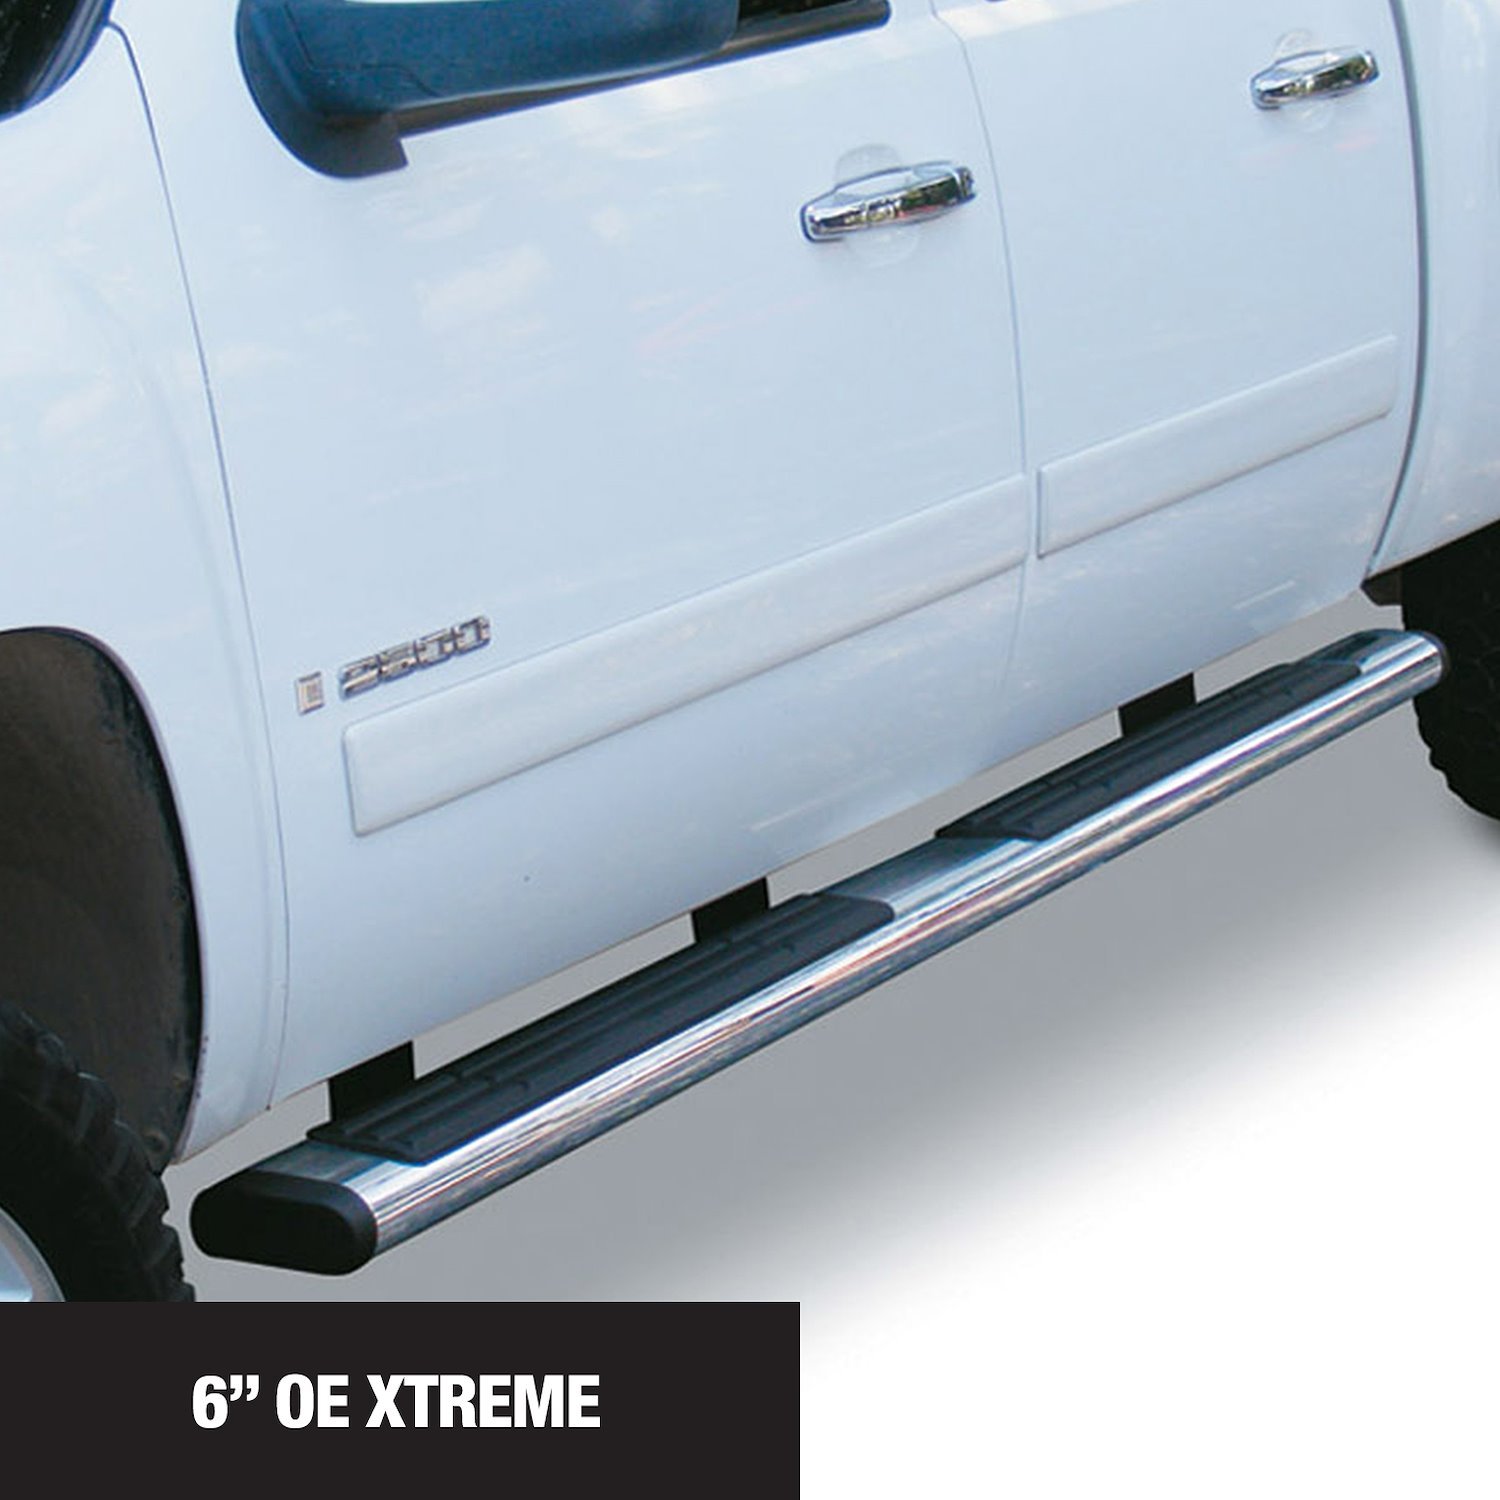 686415552PS 6" OE Xtreme Side Steps with Mounting Brackets Kit